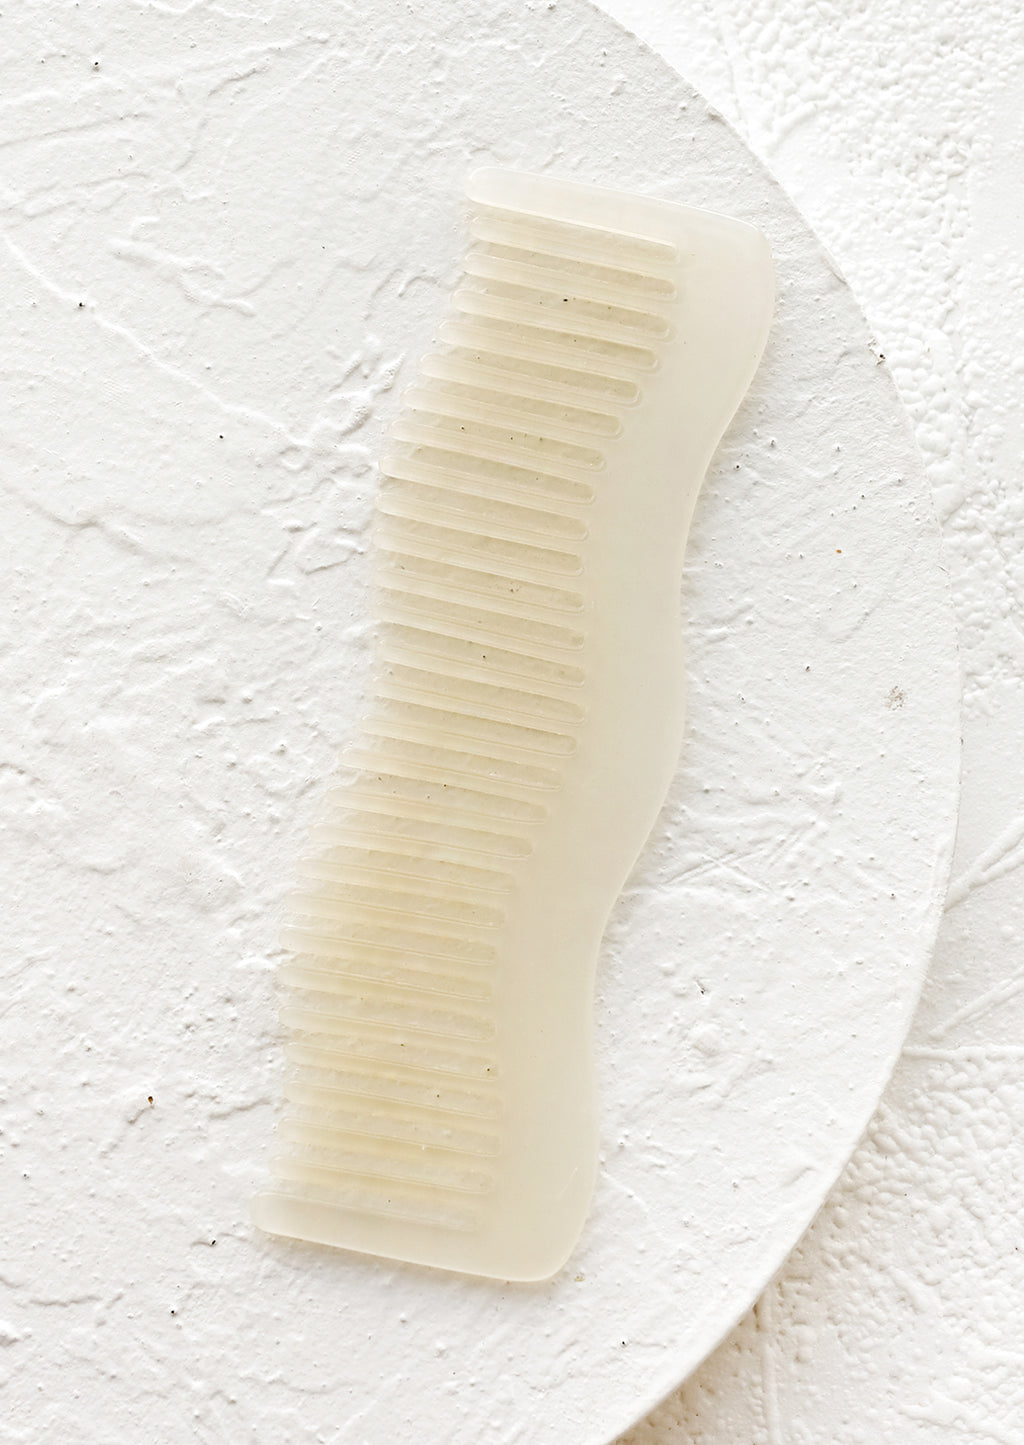 Ivory: A wavy shaped acetate comb in ivory.